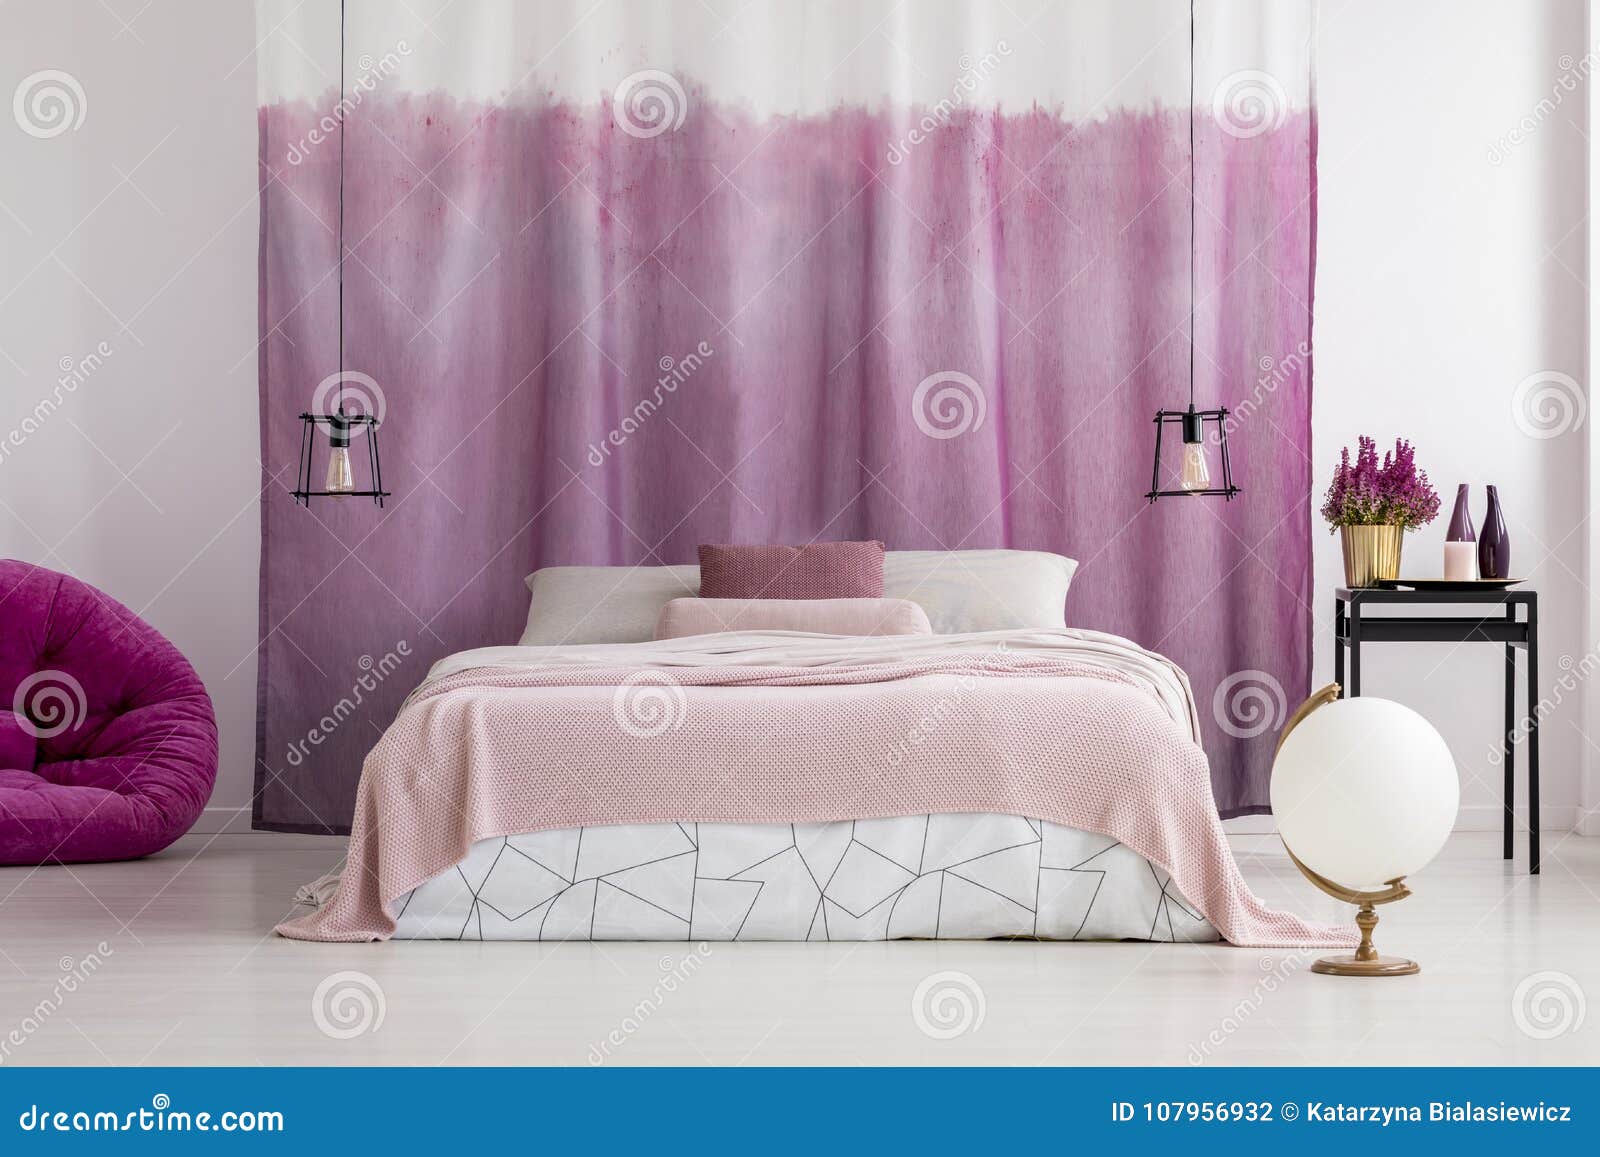 White Bedroom With Pink Accents Stock Photo Image Of